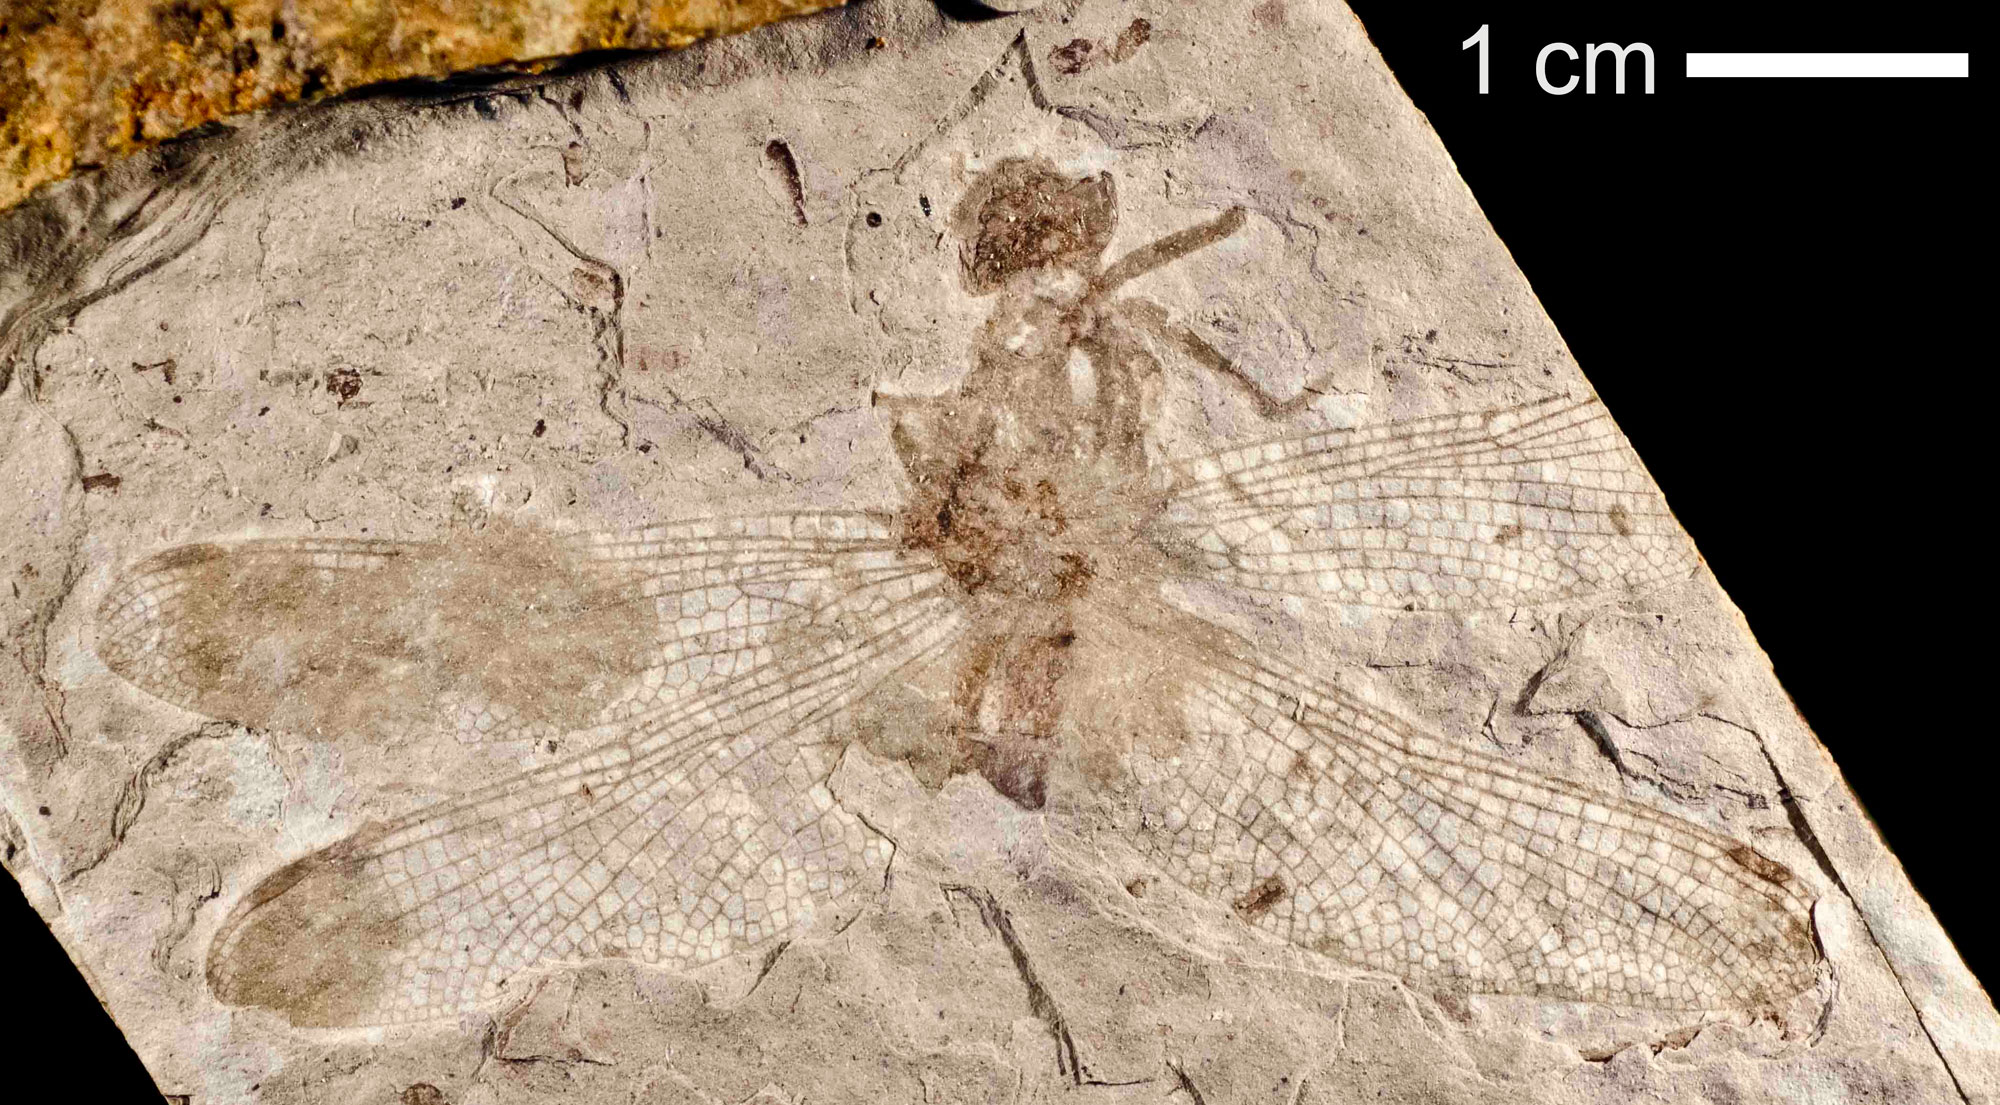 Photo of a fossil dragonfly from the Eocene of Florissant, Colorado. Four wings with nicely preserved venation can be seen on the specimen, although the body is poorly preserved.